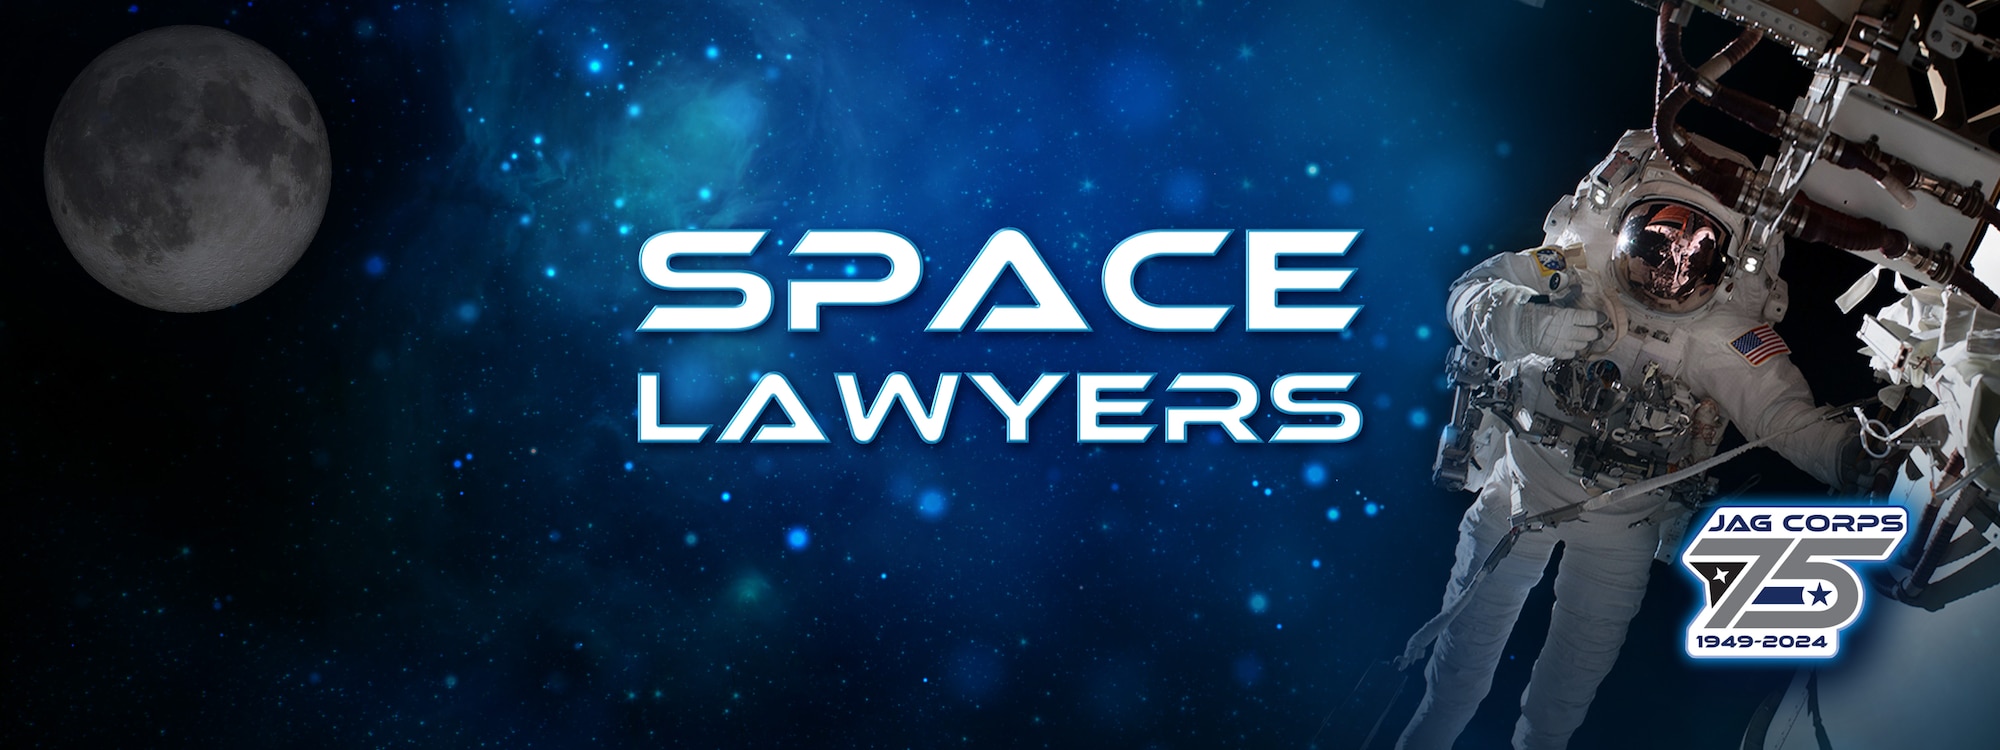 Space Lawyers. Modified Illustration: astronaut, moon & space (NASA photos). Glitter background © k_e_n / Adobe Stock. [image is not public domain]